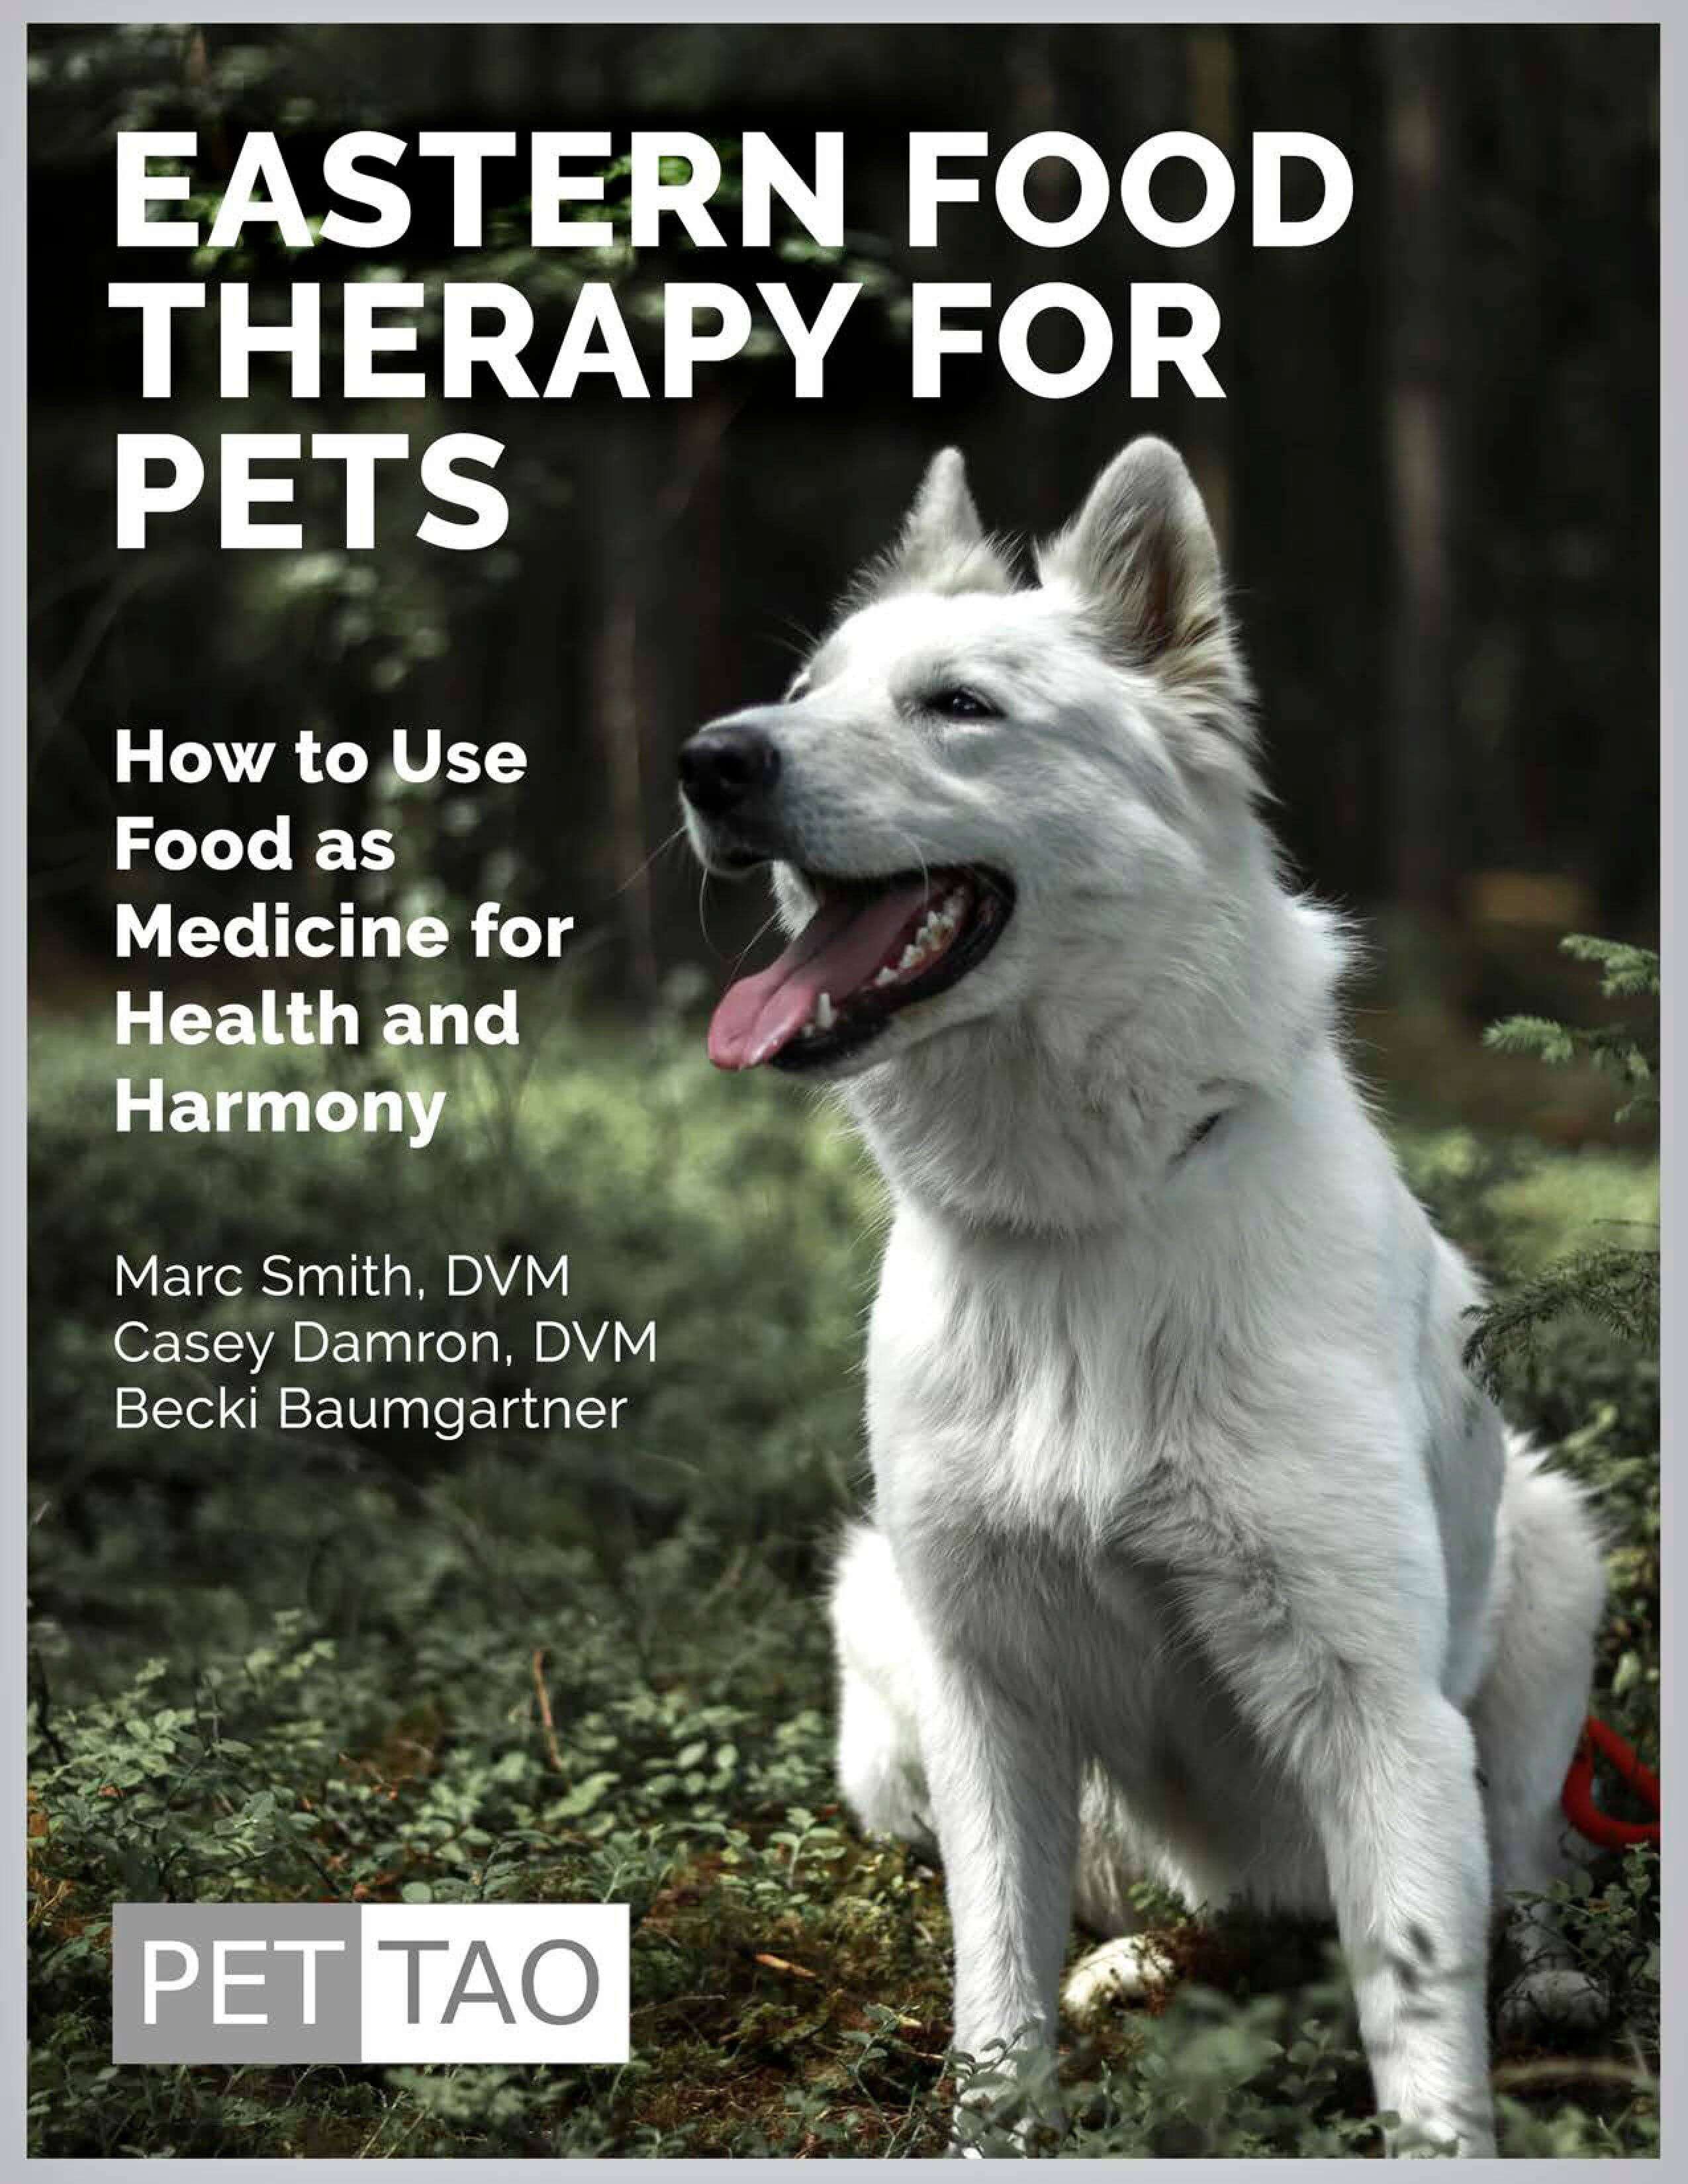 Eastern Food Therapy for Pets: How to Use Food as Medicine for Health & Harmony - Instant Ebook Download  - TCVM Pet Supply